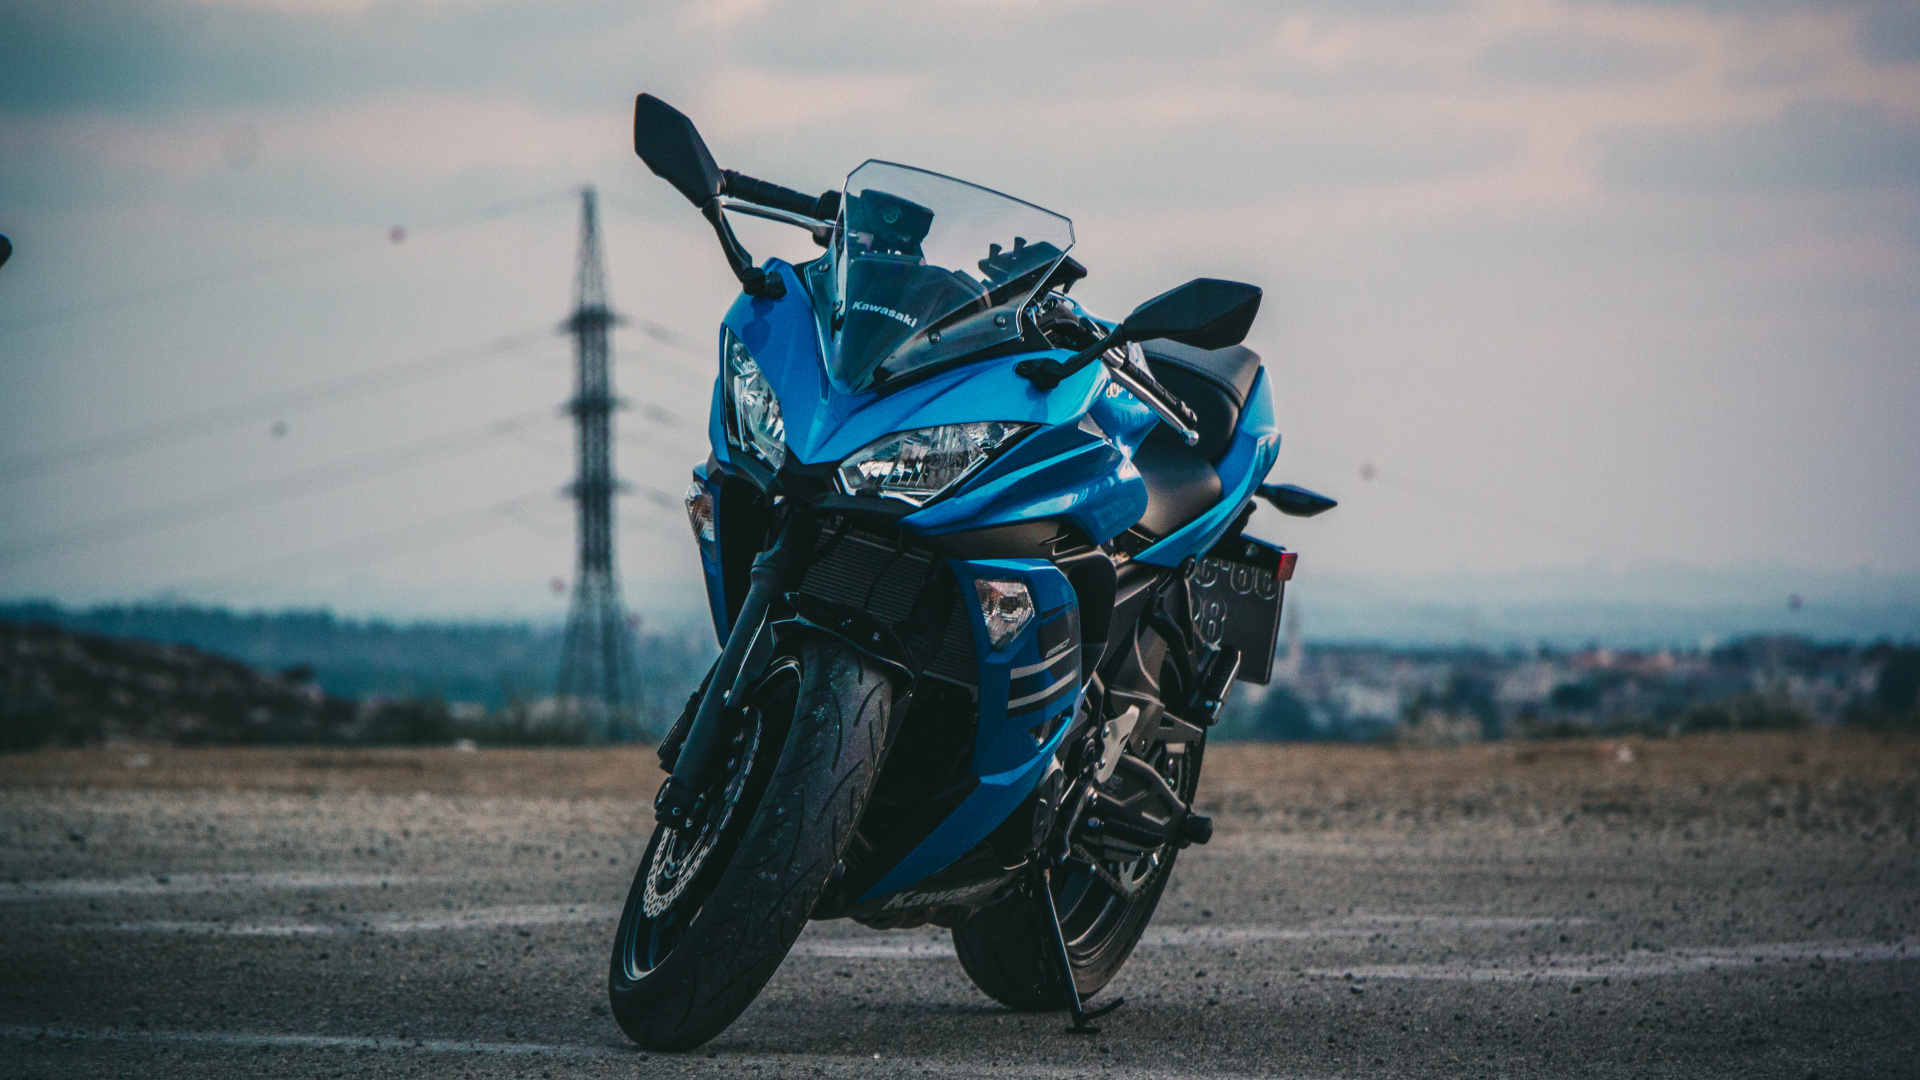 Blue and Black Sports Bike on Gray Asphalt Road During Daytime. Wallpaper in 1920x1080 Resolution